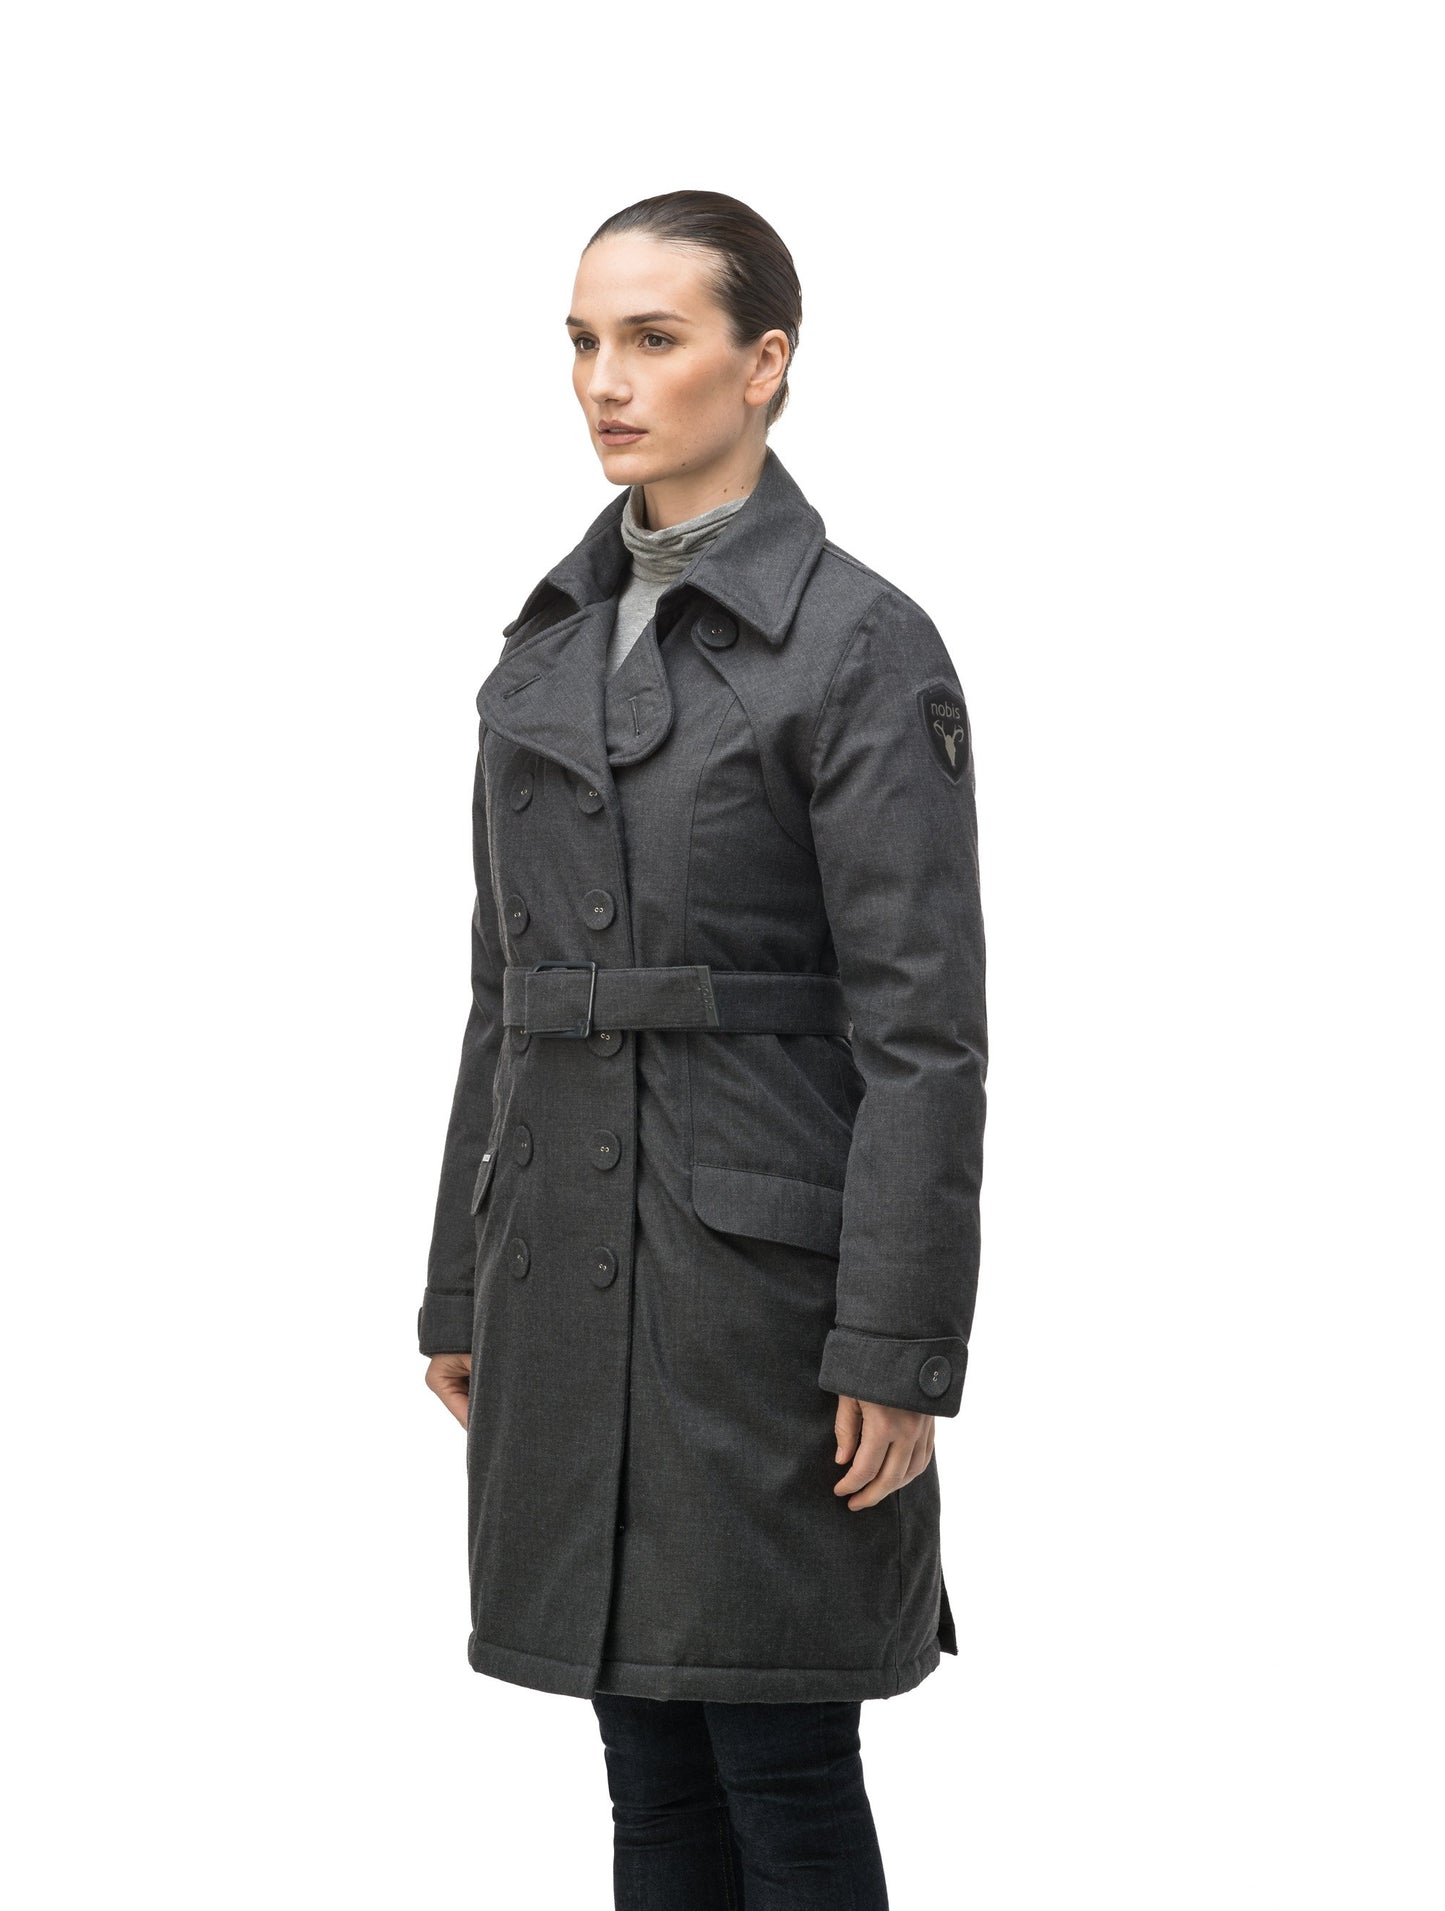 Women's down filled double breasted peacoat with a belted waist in H. Charcoal